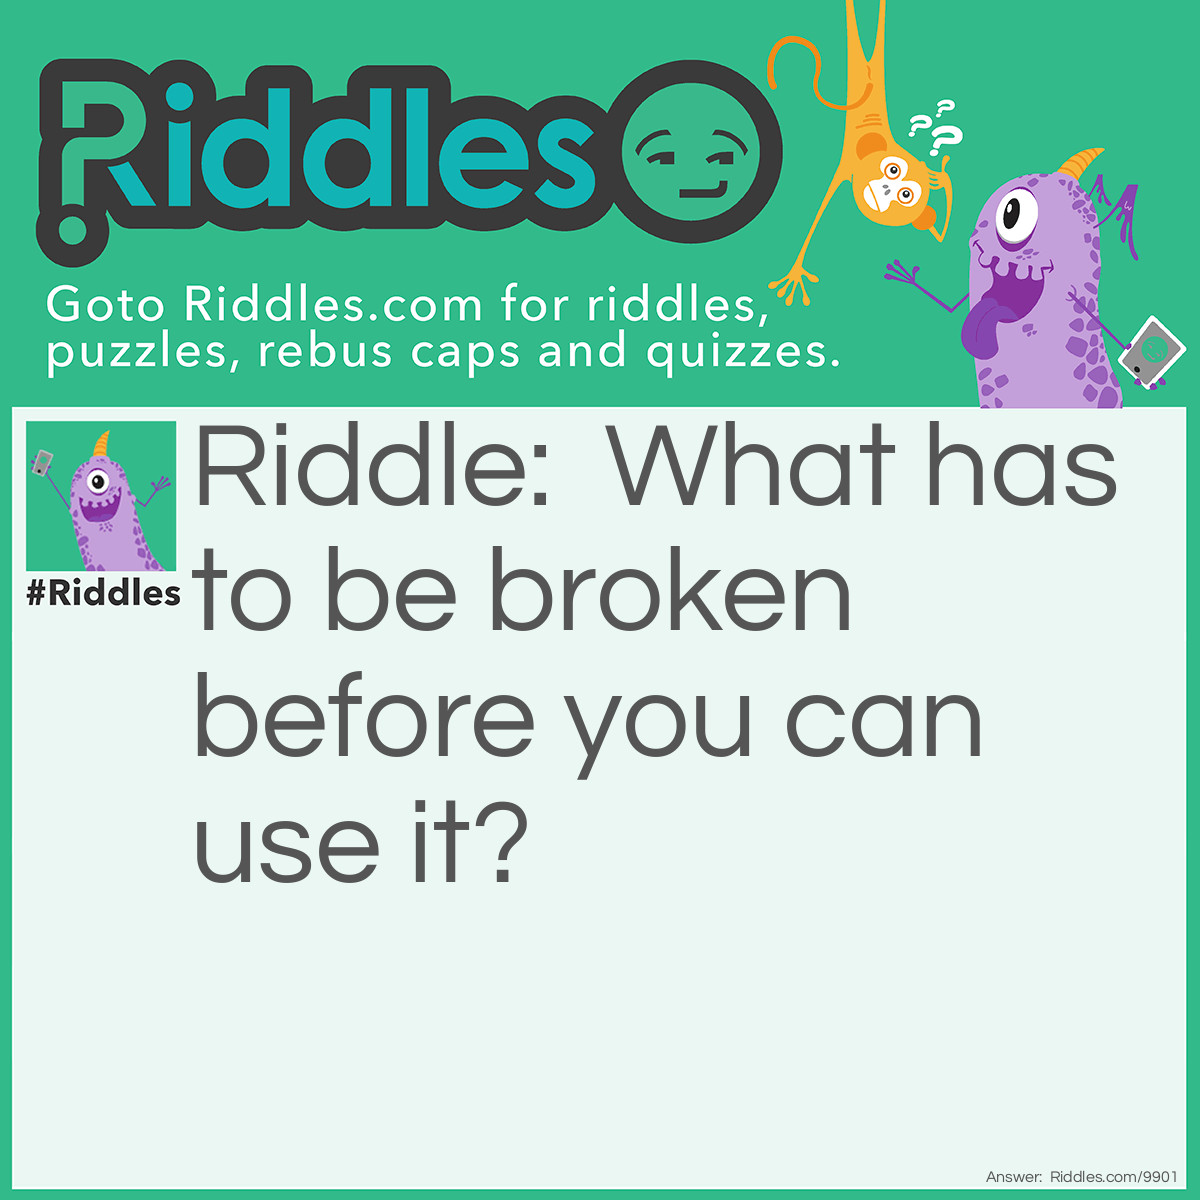 Riddle: What has to be broken before you can use it? Answer: An egg.